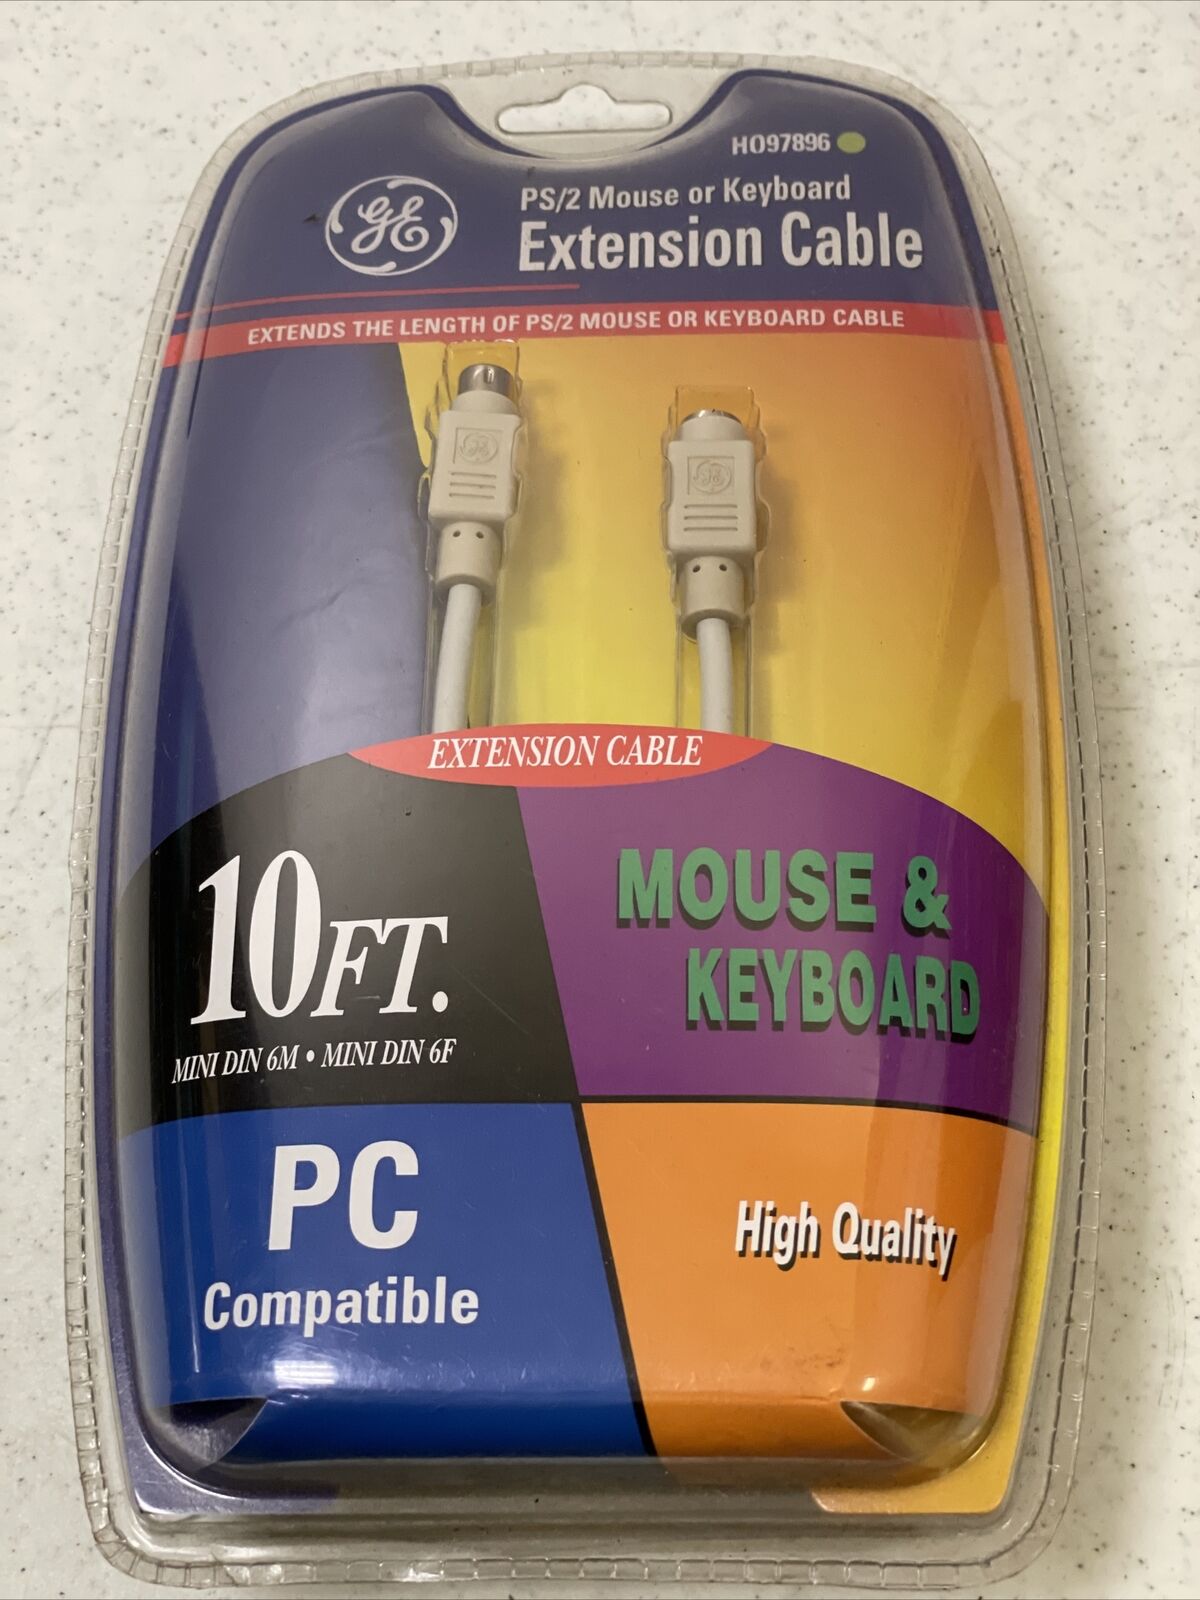 NEW GE 10 Feet PS/2 Mouse & Keyboard Extension Cable HO97896 PC Compatible *